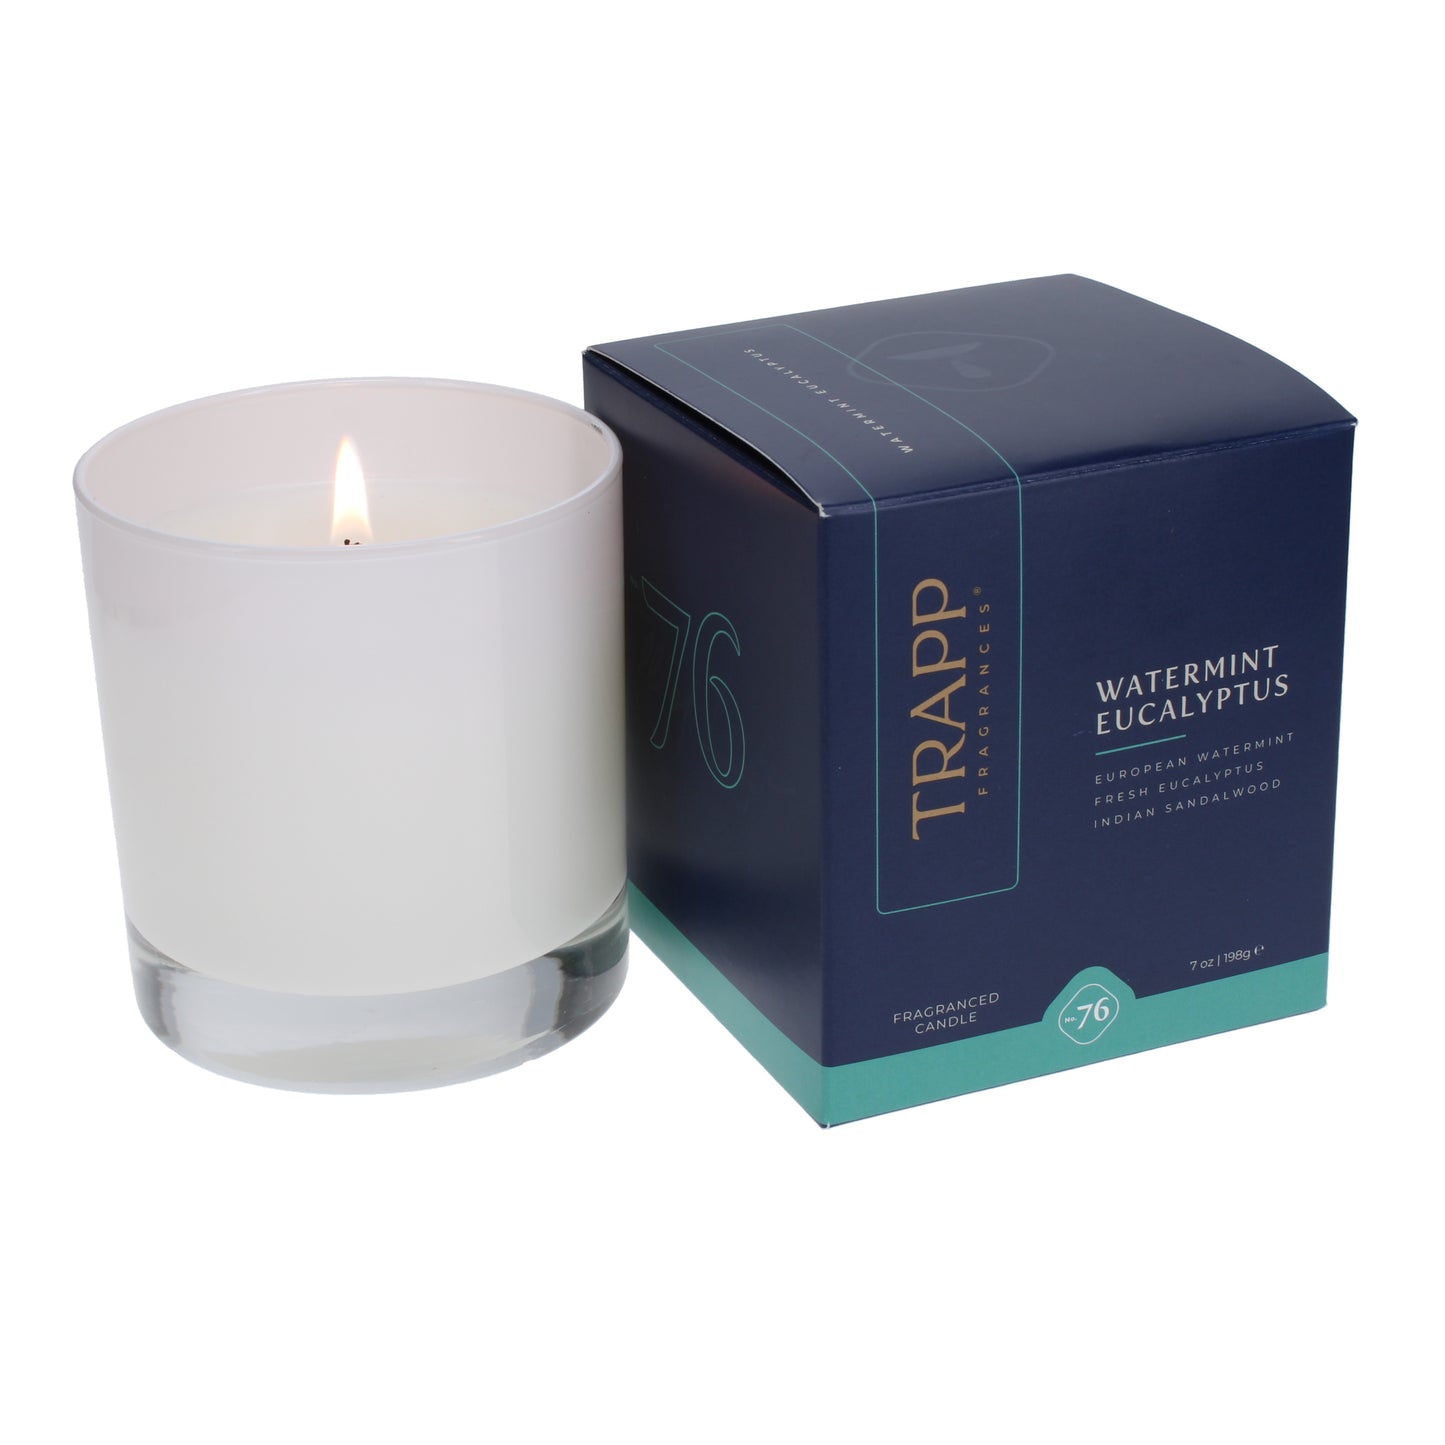 No. 76 Watermint Eucalyptus 7 oz. Candle in Signature Box Image 2